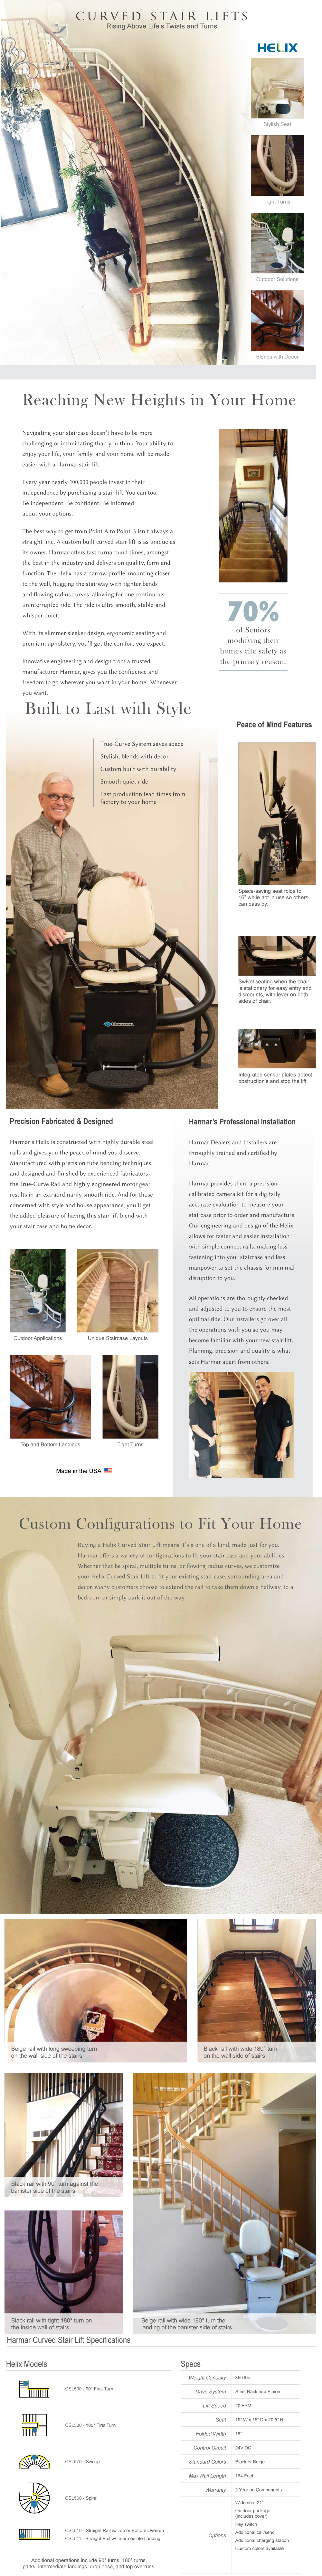 Harmar Mobility Curved Stair Lift